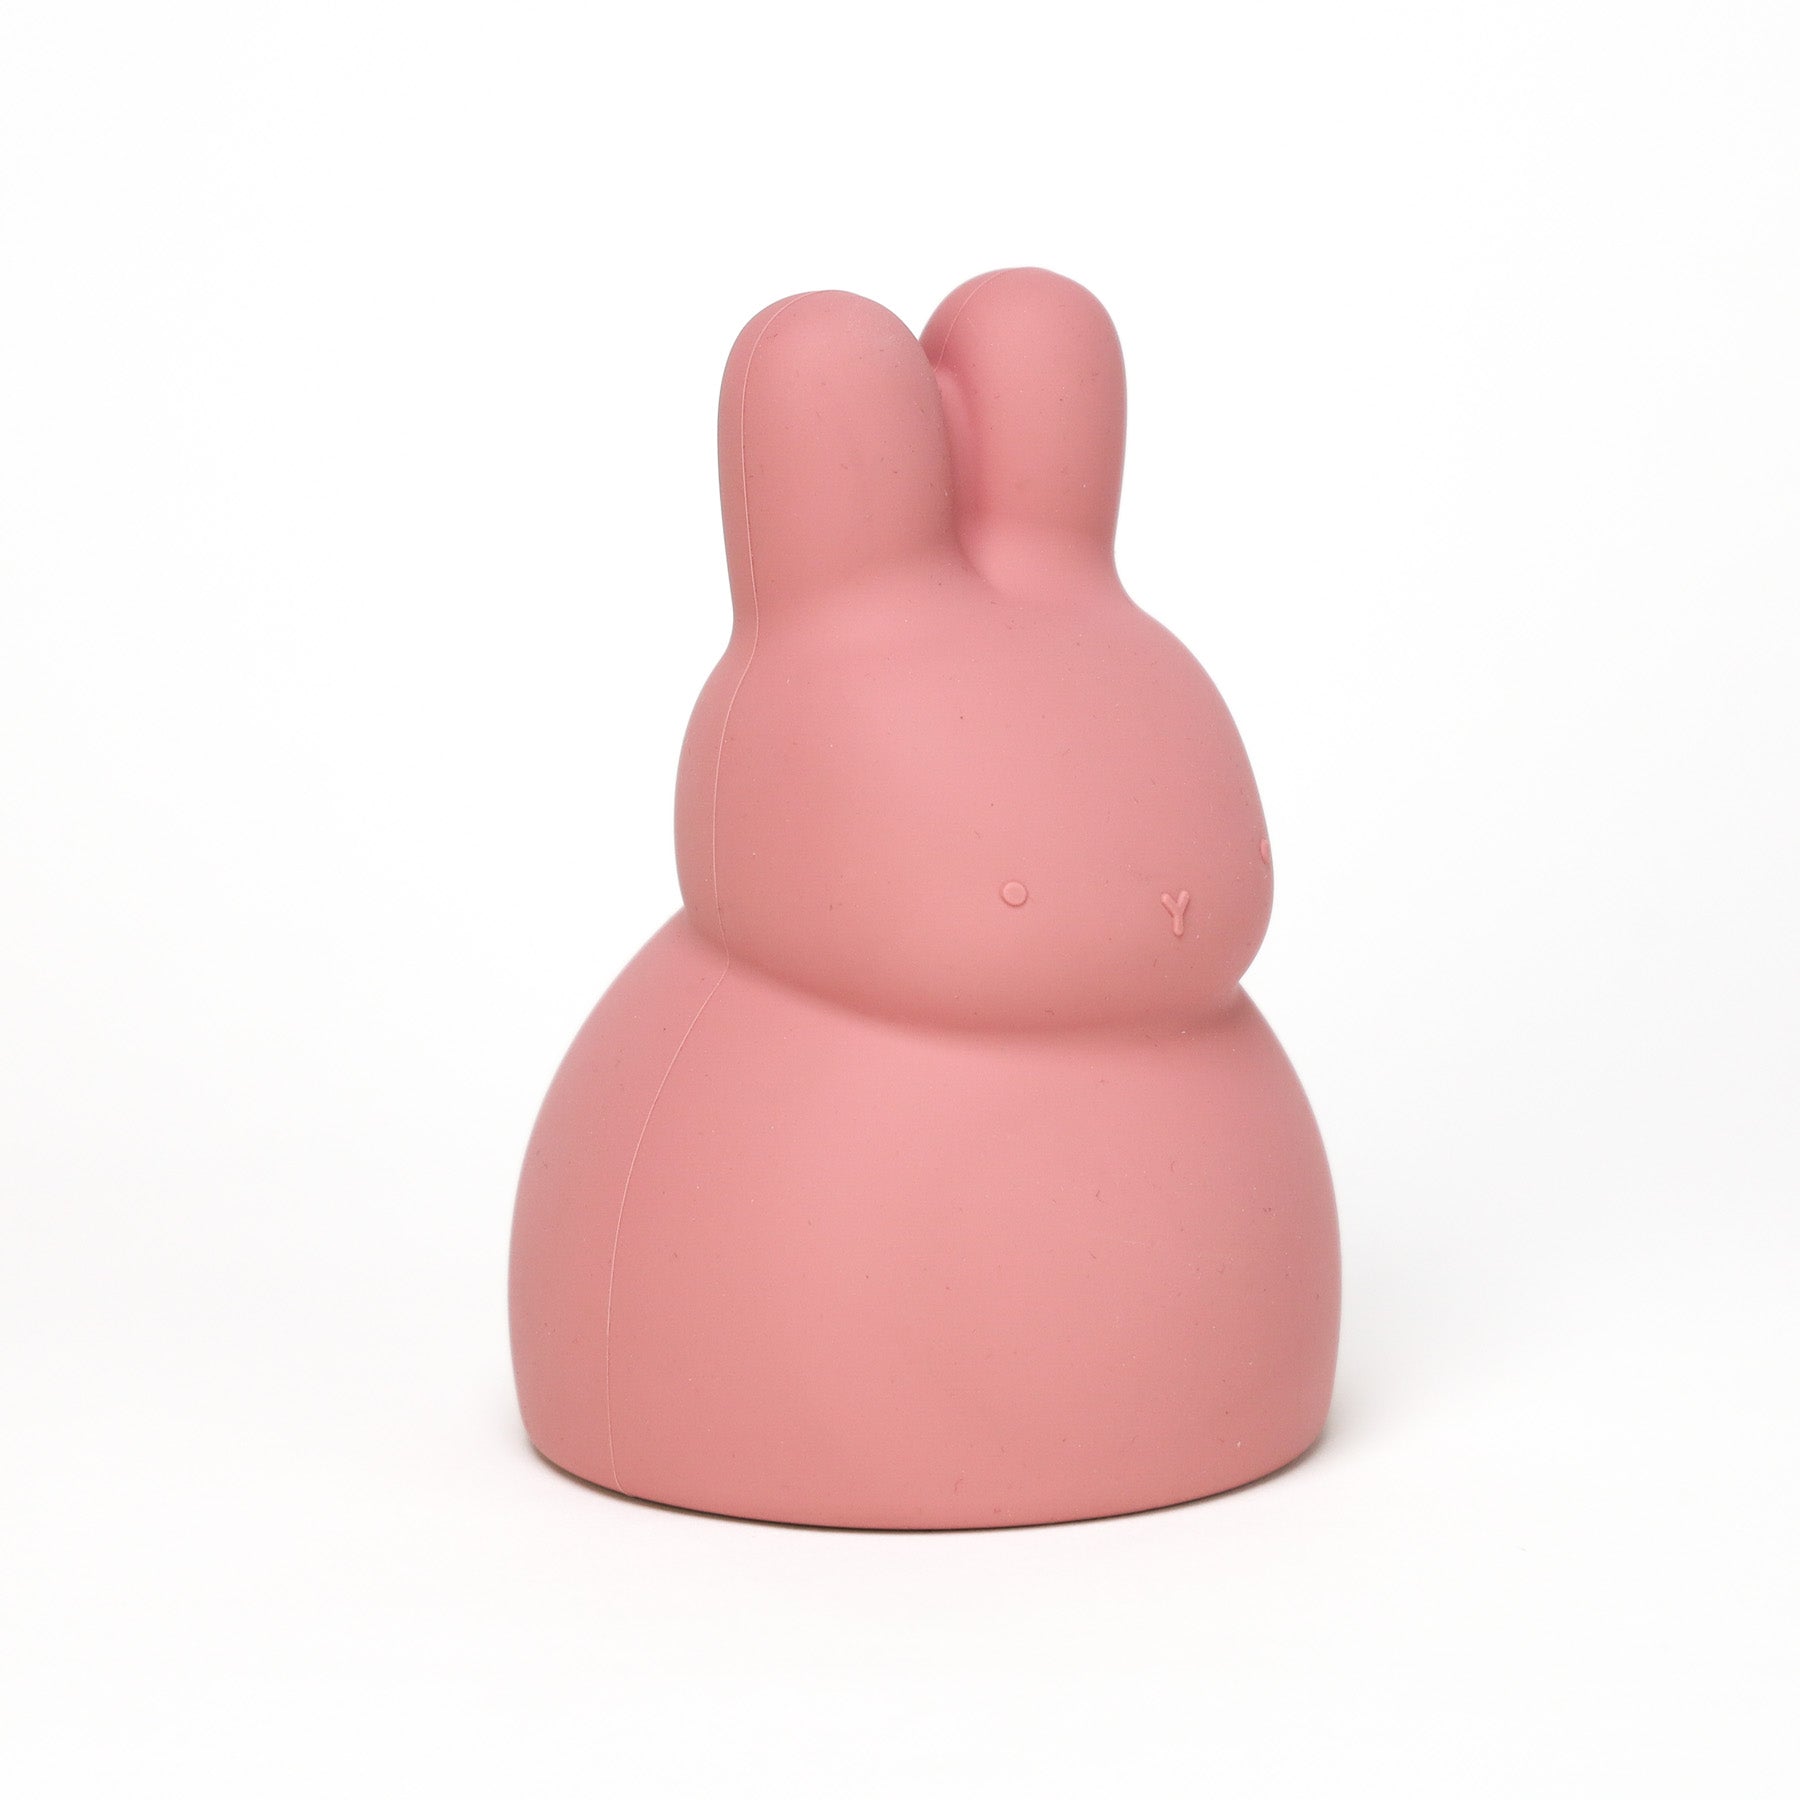 Silicone Piggy Bank Bunny PInk